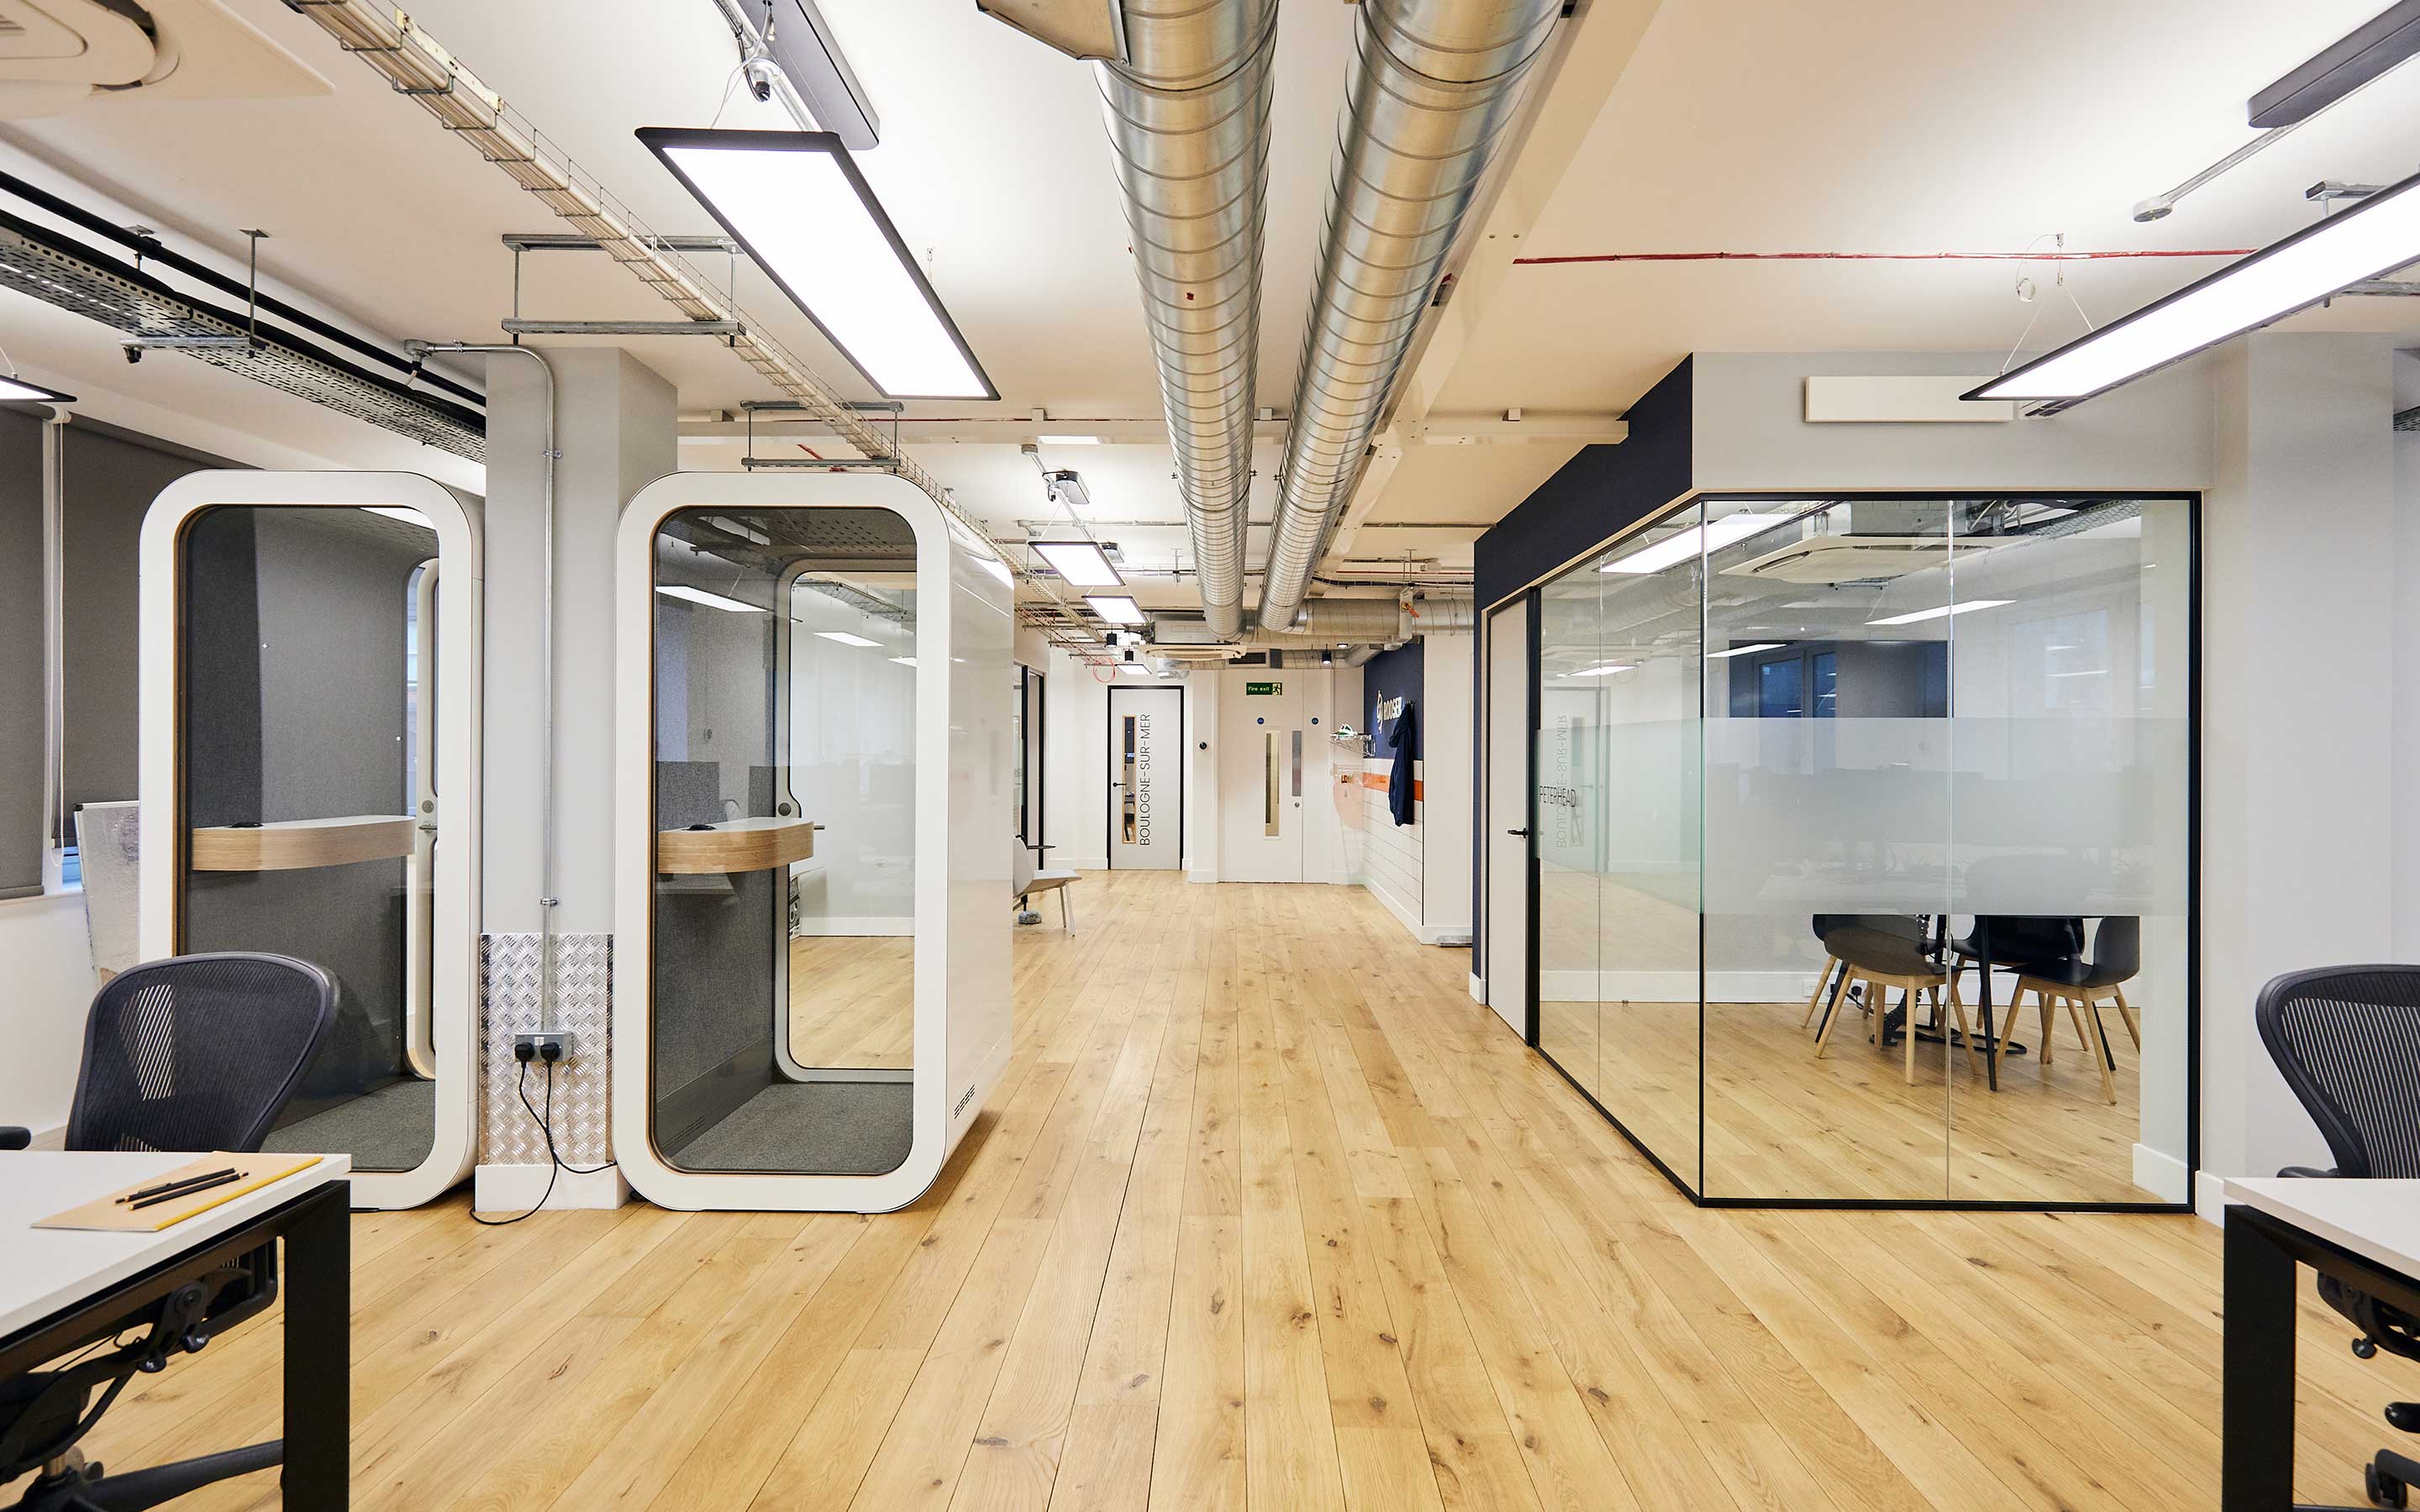 A view of a sleek office interior design with glass walled meeting rooms and modern zoom booths, including wooden flooring and white walls